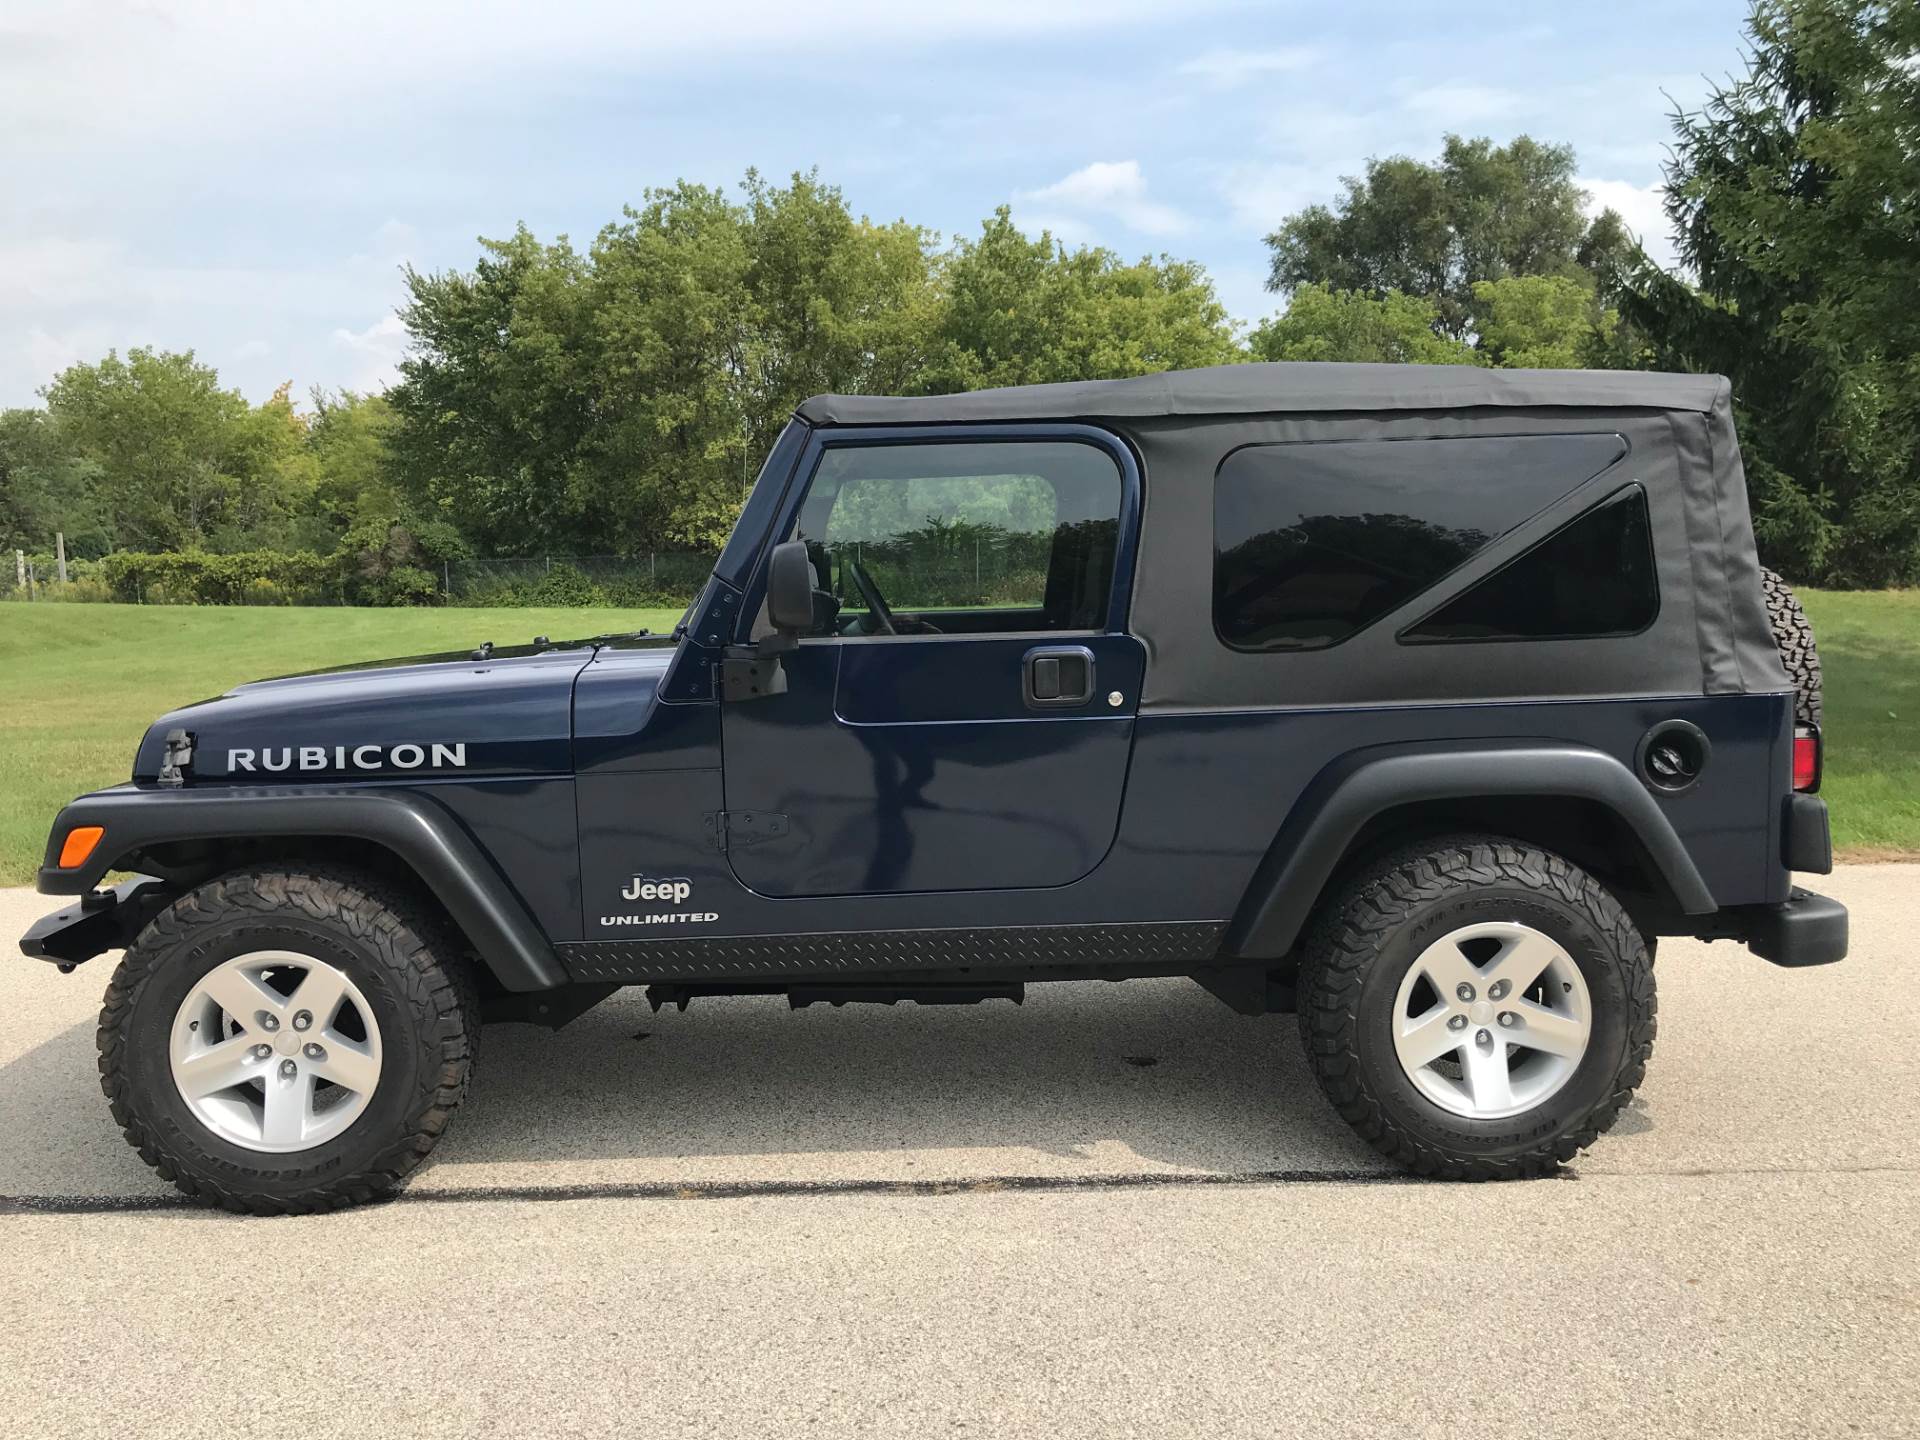 2006 Jeep Wrangler Unlimited Rubicon 2dr SUV 4WD in Big Bend, Wisconsin - Photo 85